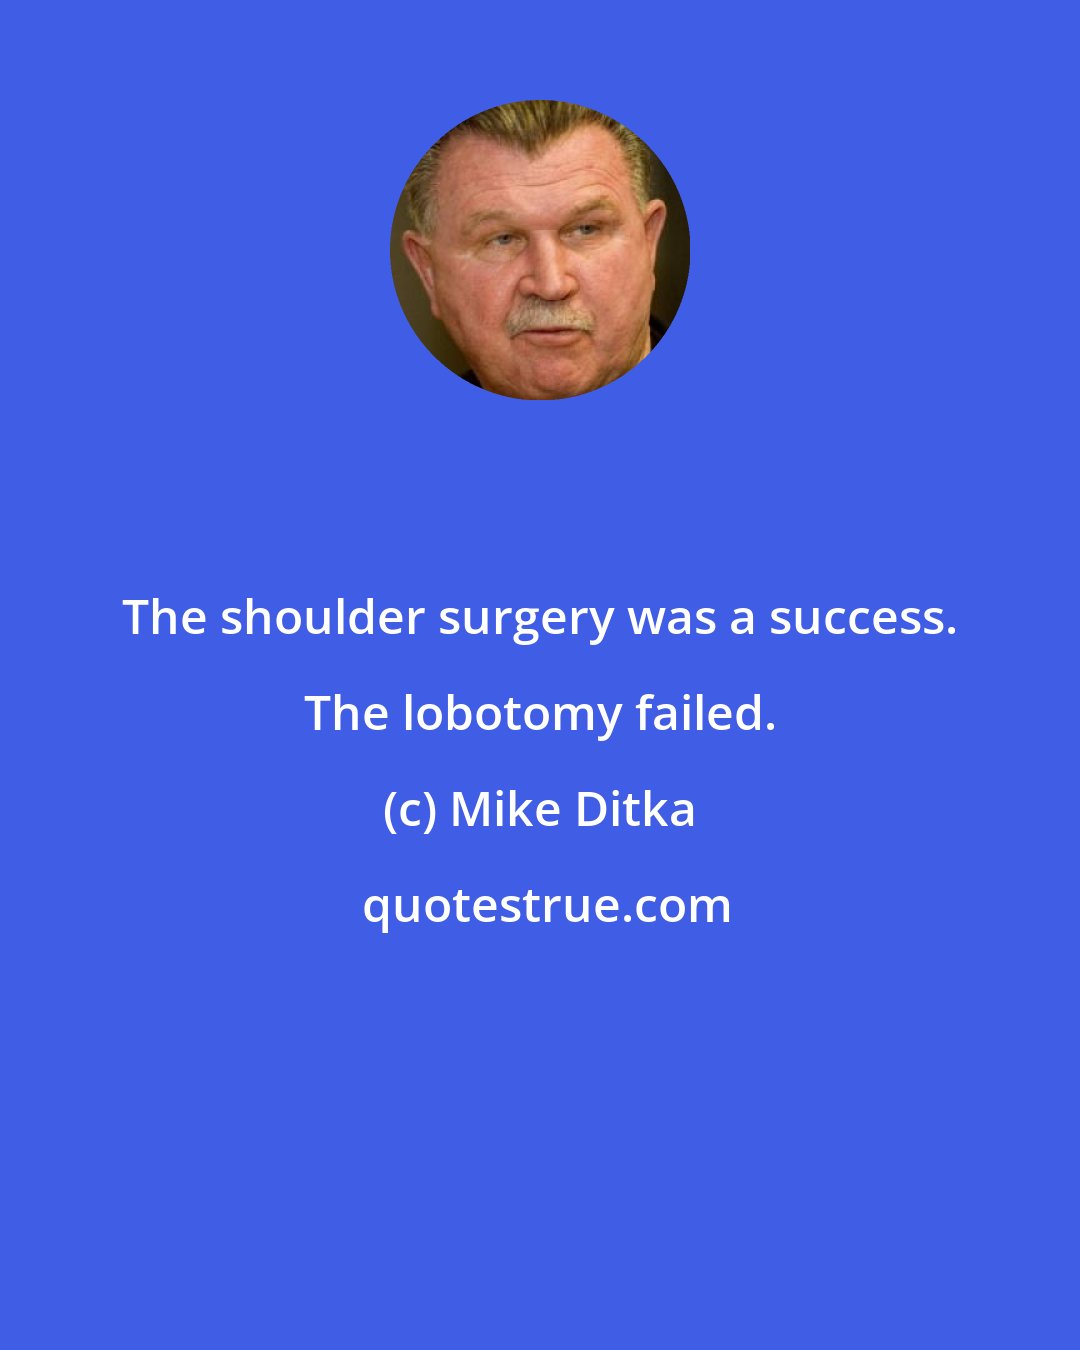 Mike Ditka: The shoulder surgery was a success. The lobotomy failed.